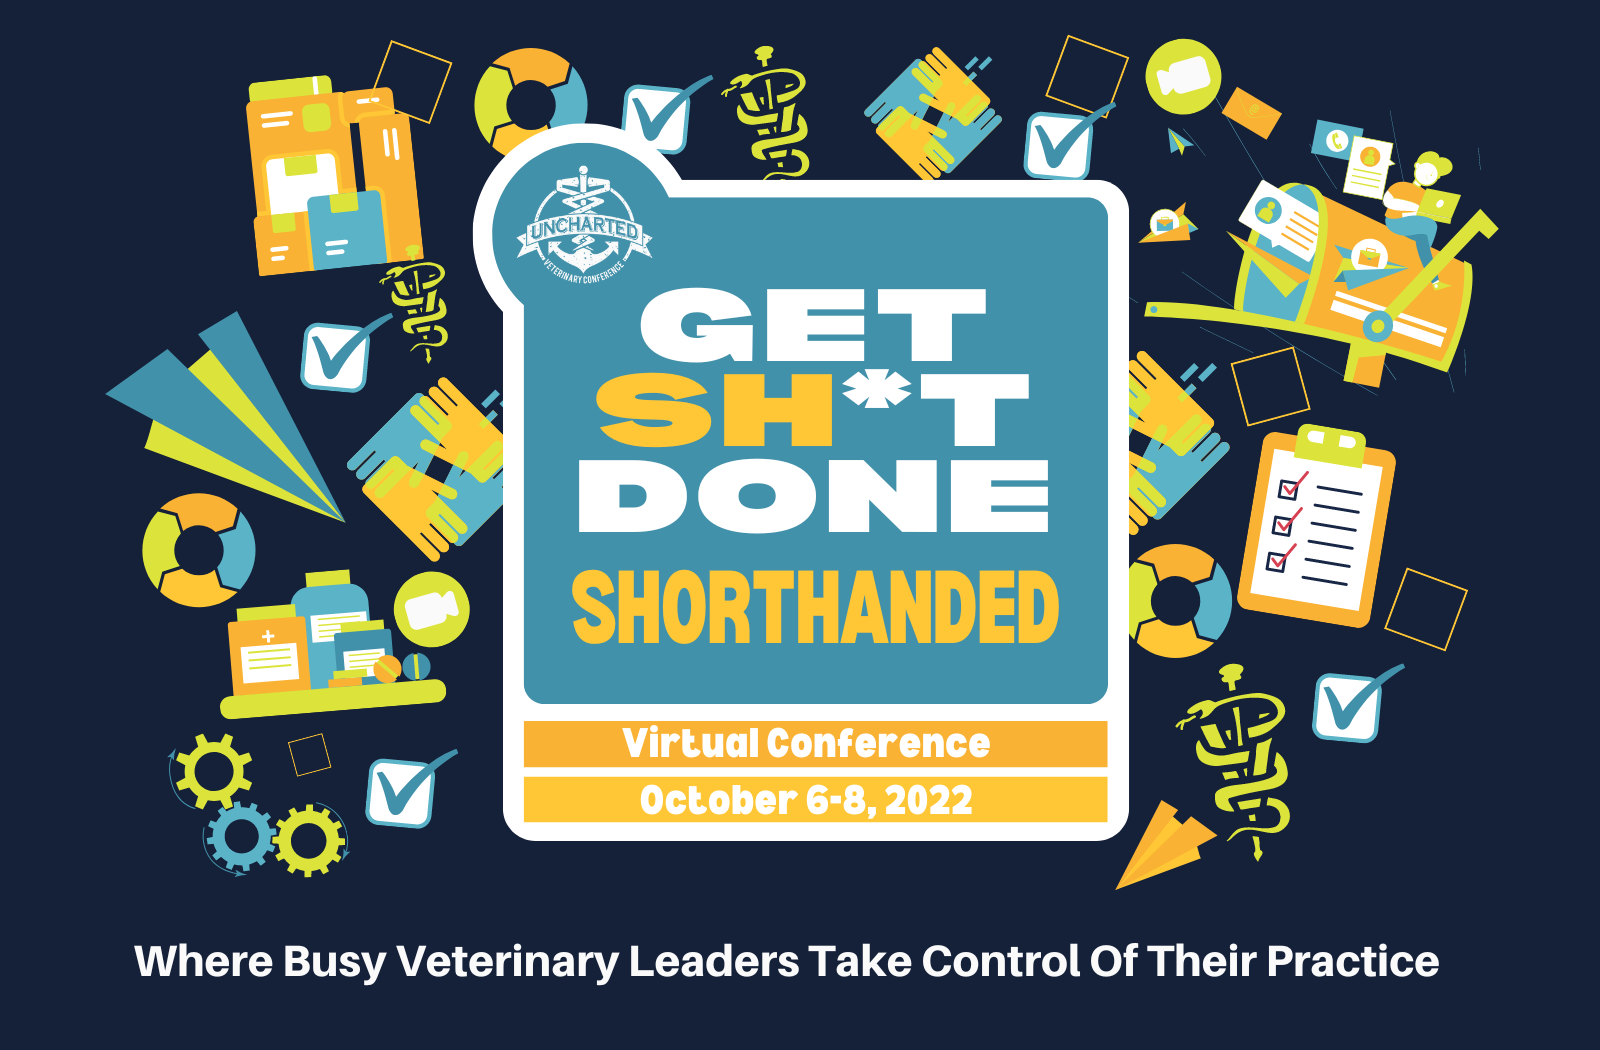 get sh*t done shorthanded conference image